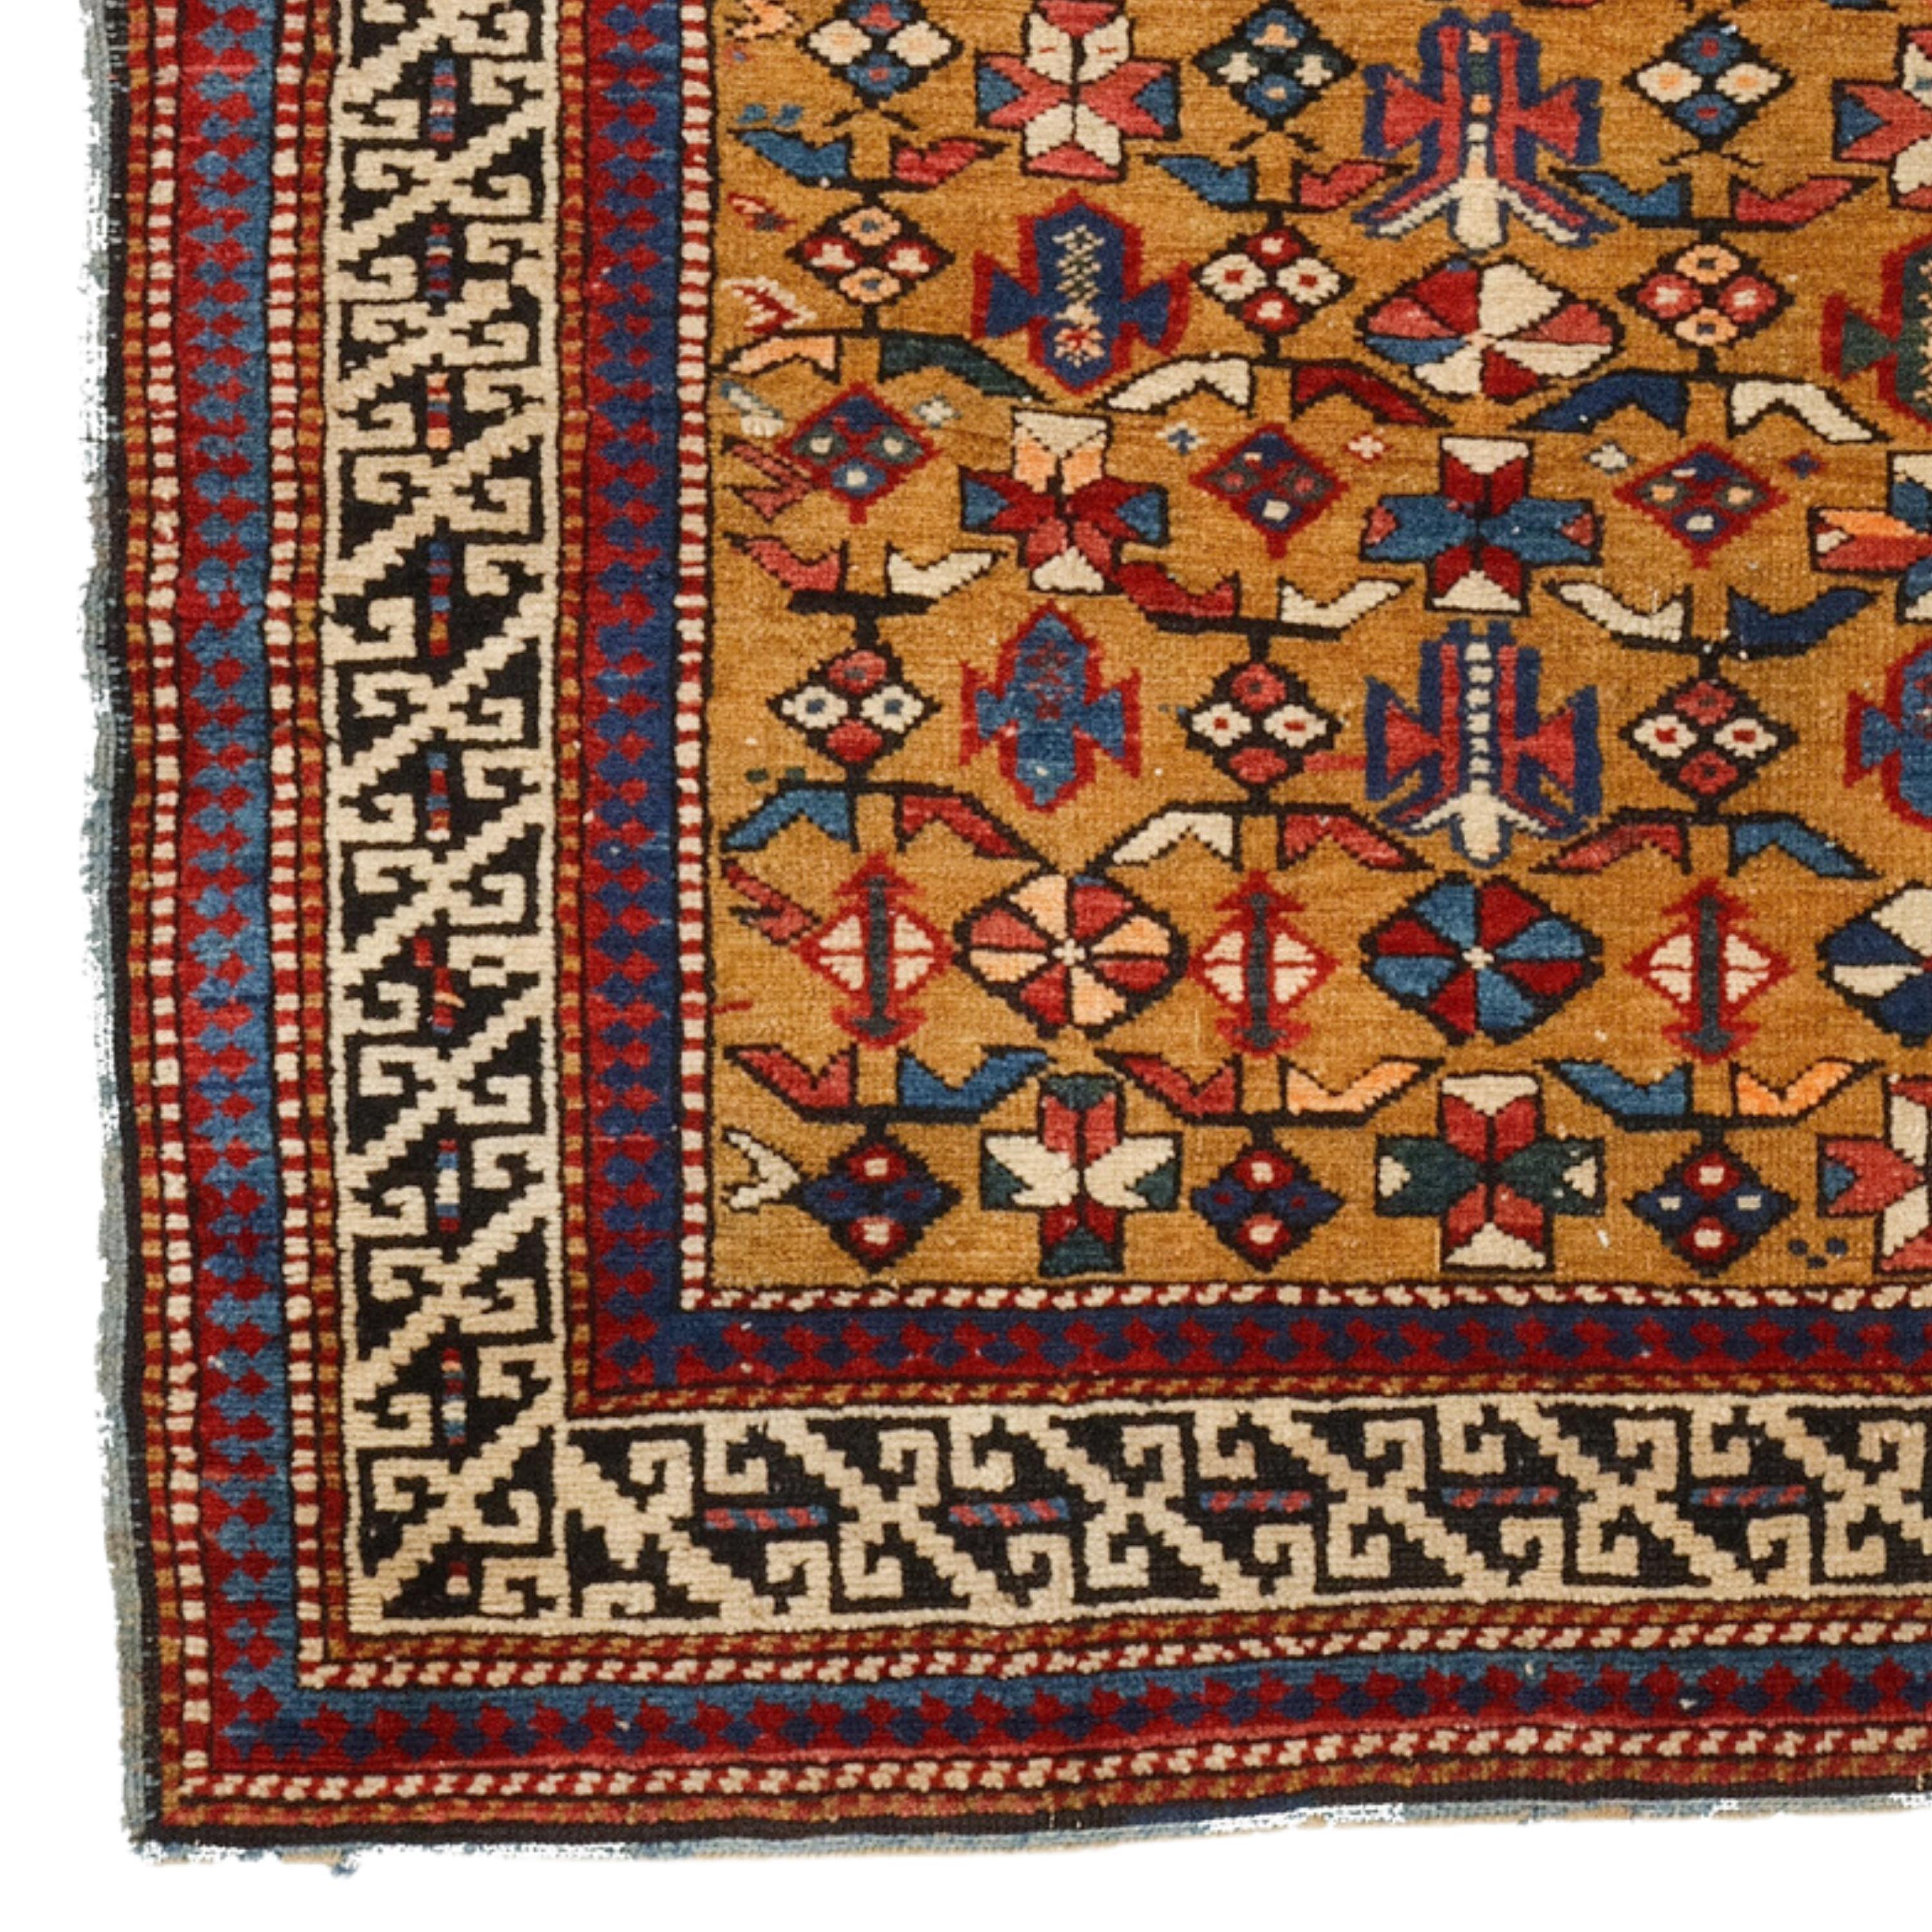 Antique Kuba Shirvan Rug
Late Of The 19th Century Kuba Shirvan Rug in Good Condition
Size 115 x 165 cm (45,2x64,9 In)

Shirvan carpet is a handmade floor covering in the Shirvan region of Azerbaijan in the Southeastern Caucasus.

Most of the smaller